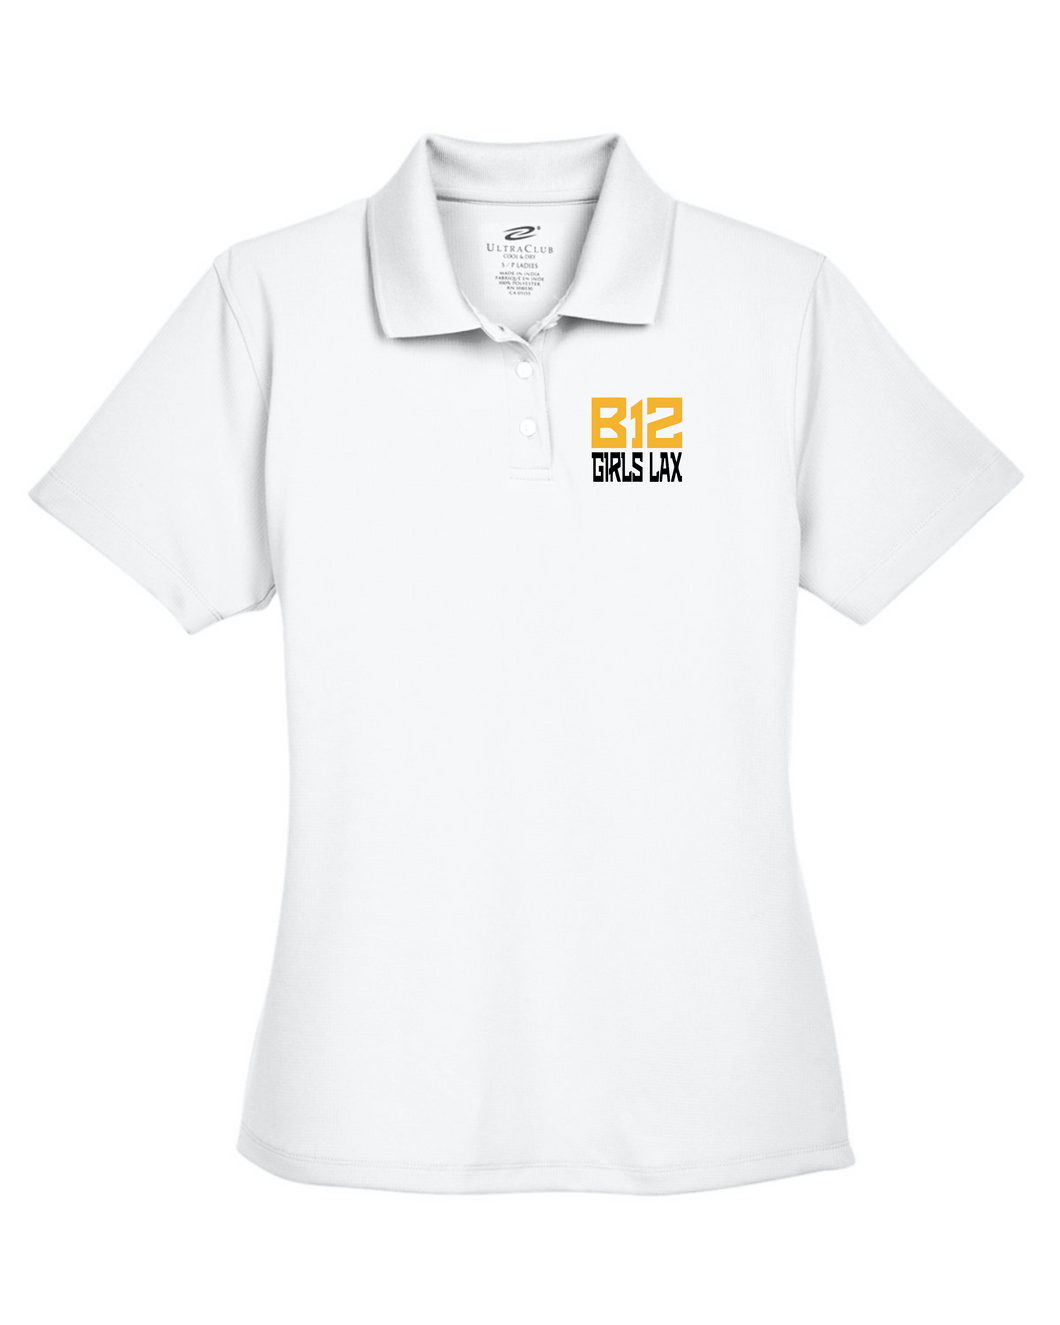 B12-LAX-507-4 - UltraClub Cool & Dry Stain-Release Performance Polo - B12 Girls LAX Stack Logo